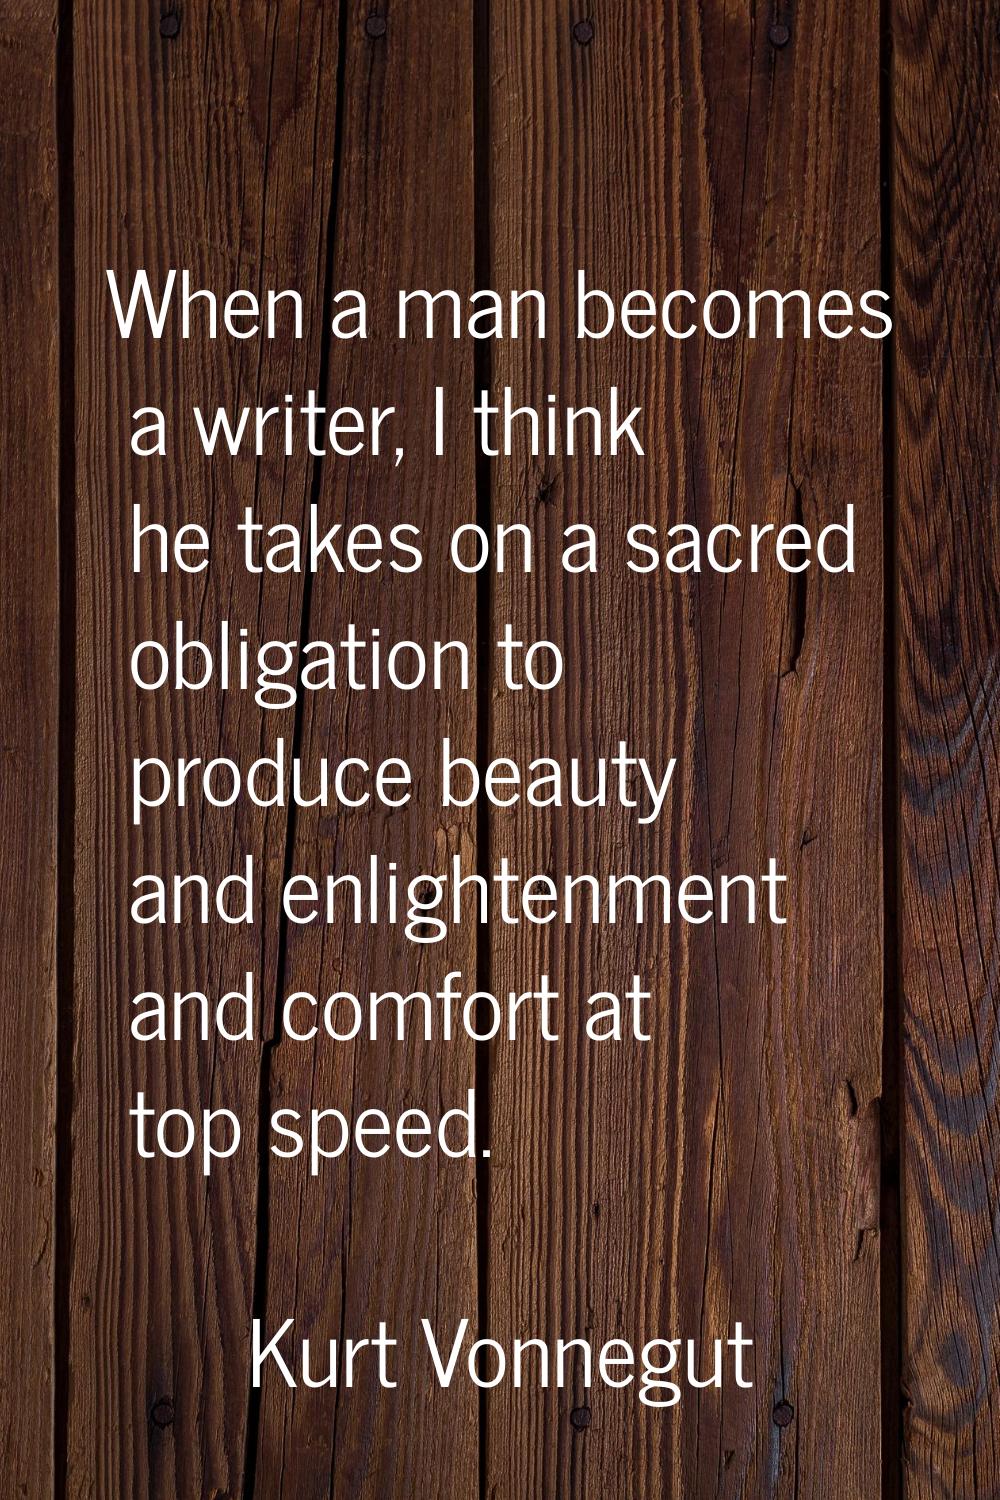 When a man becomes a writer, I think he takes on a sacred obligation to produce beauty and enlighte